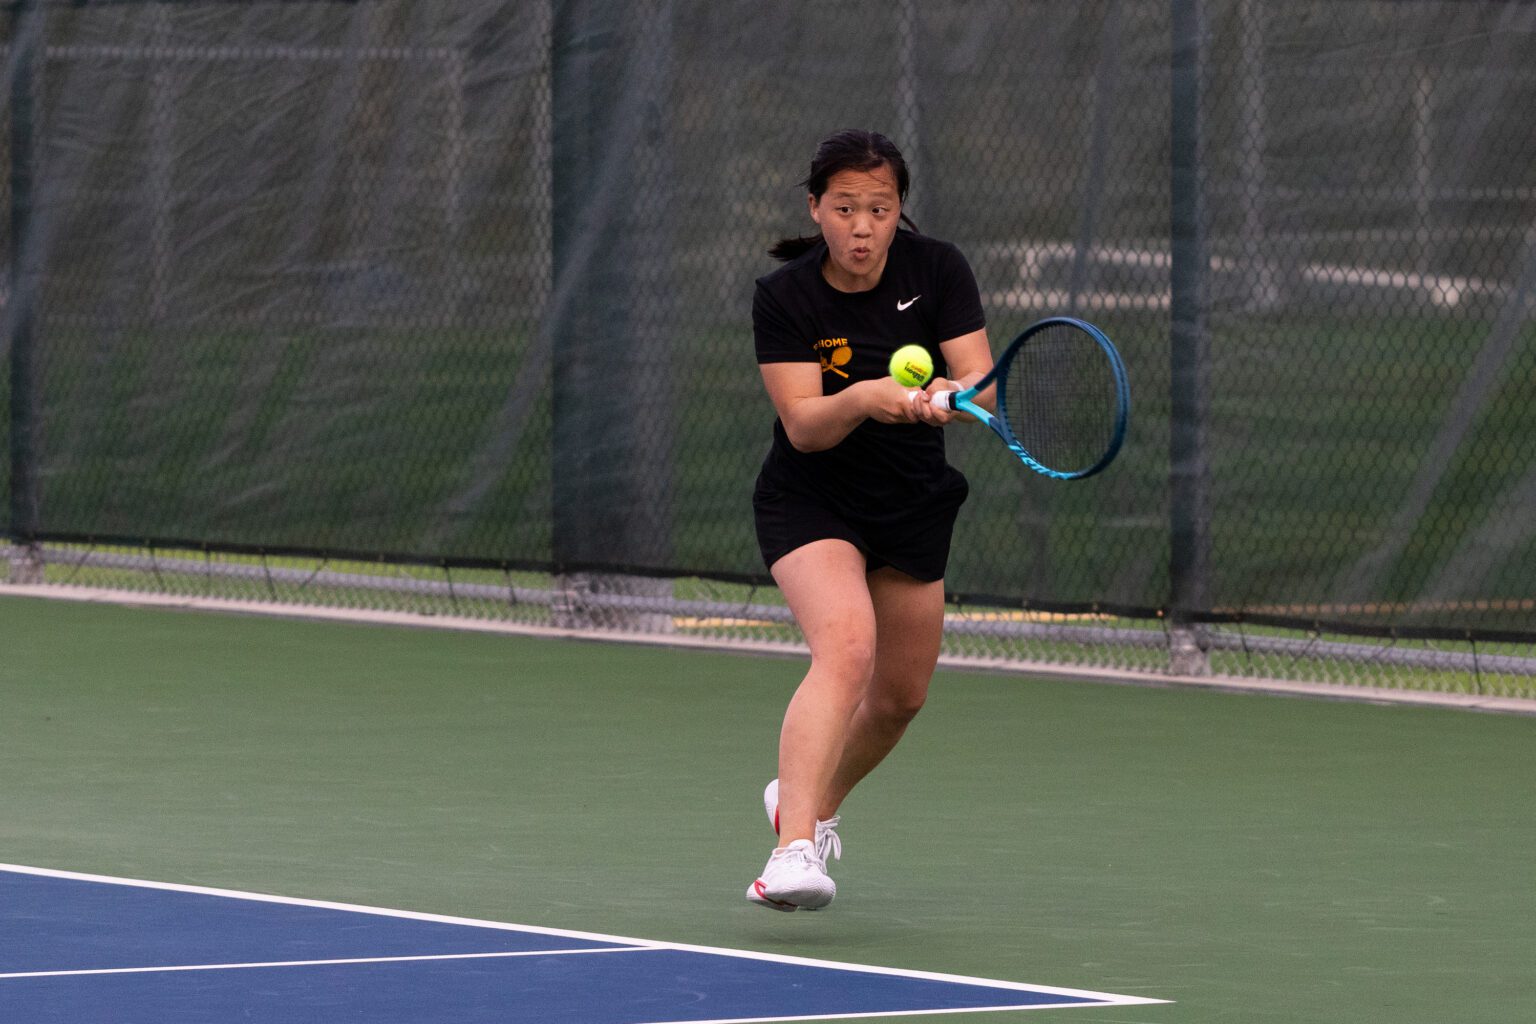 Sehome's Erin Lin hits back a serve in the singles consolation final against Squalicum's Bernadine Salvatierra. Lin won the match and will be moving on to the state tournament.